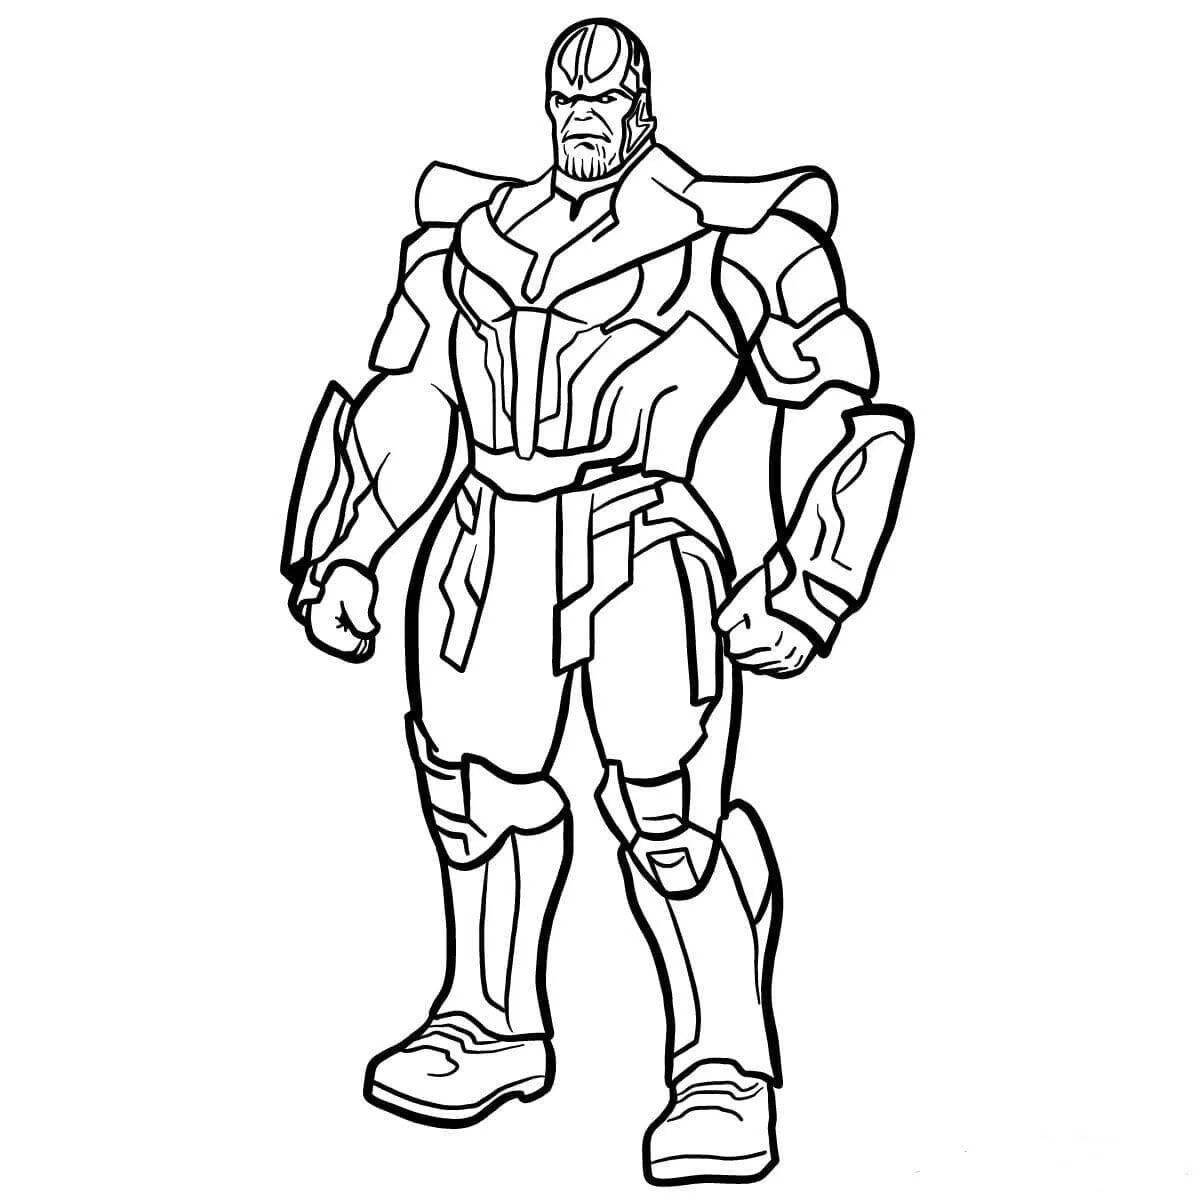 Amazing thanas coloring page